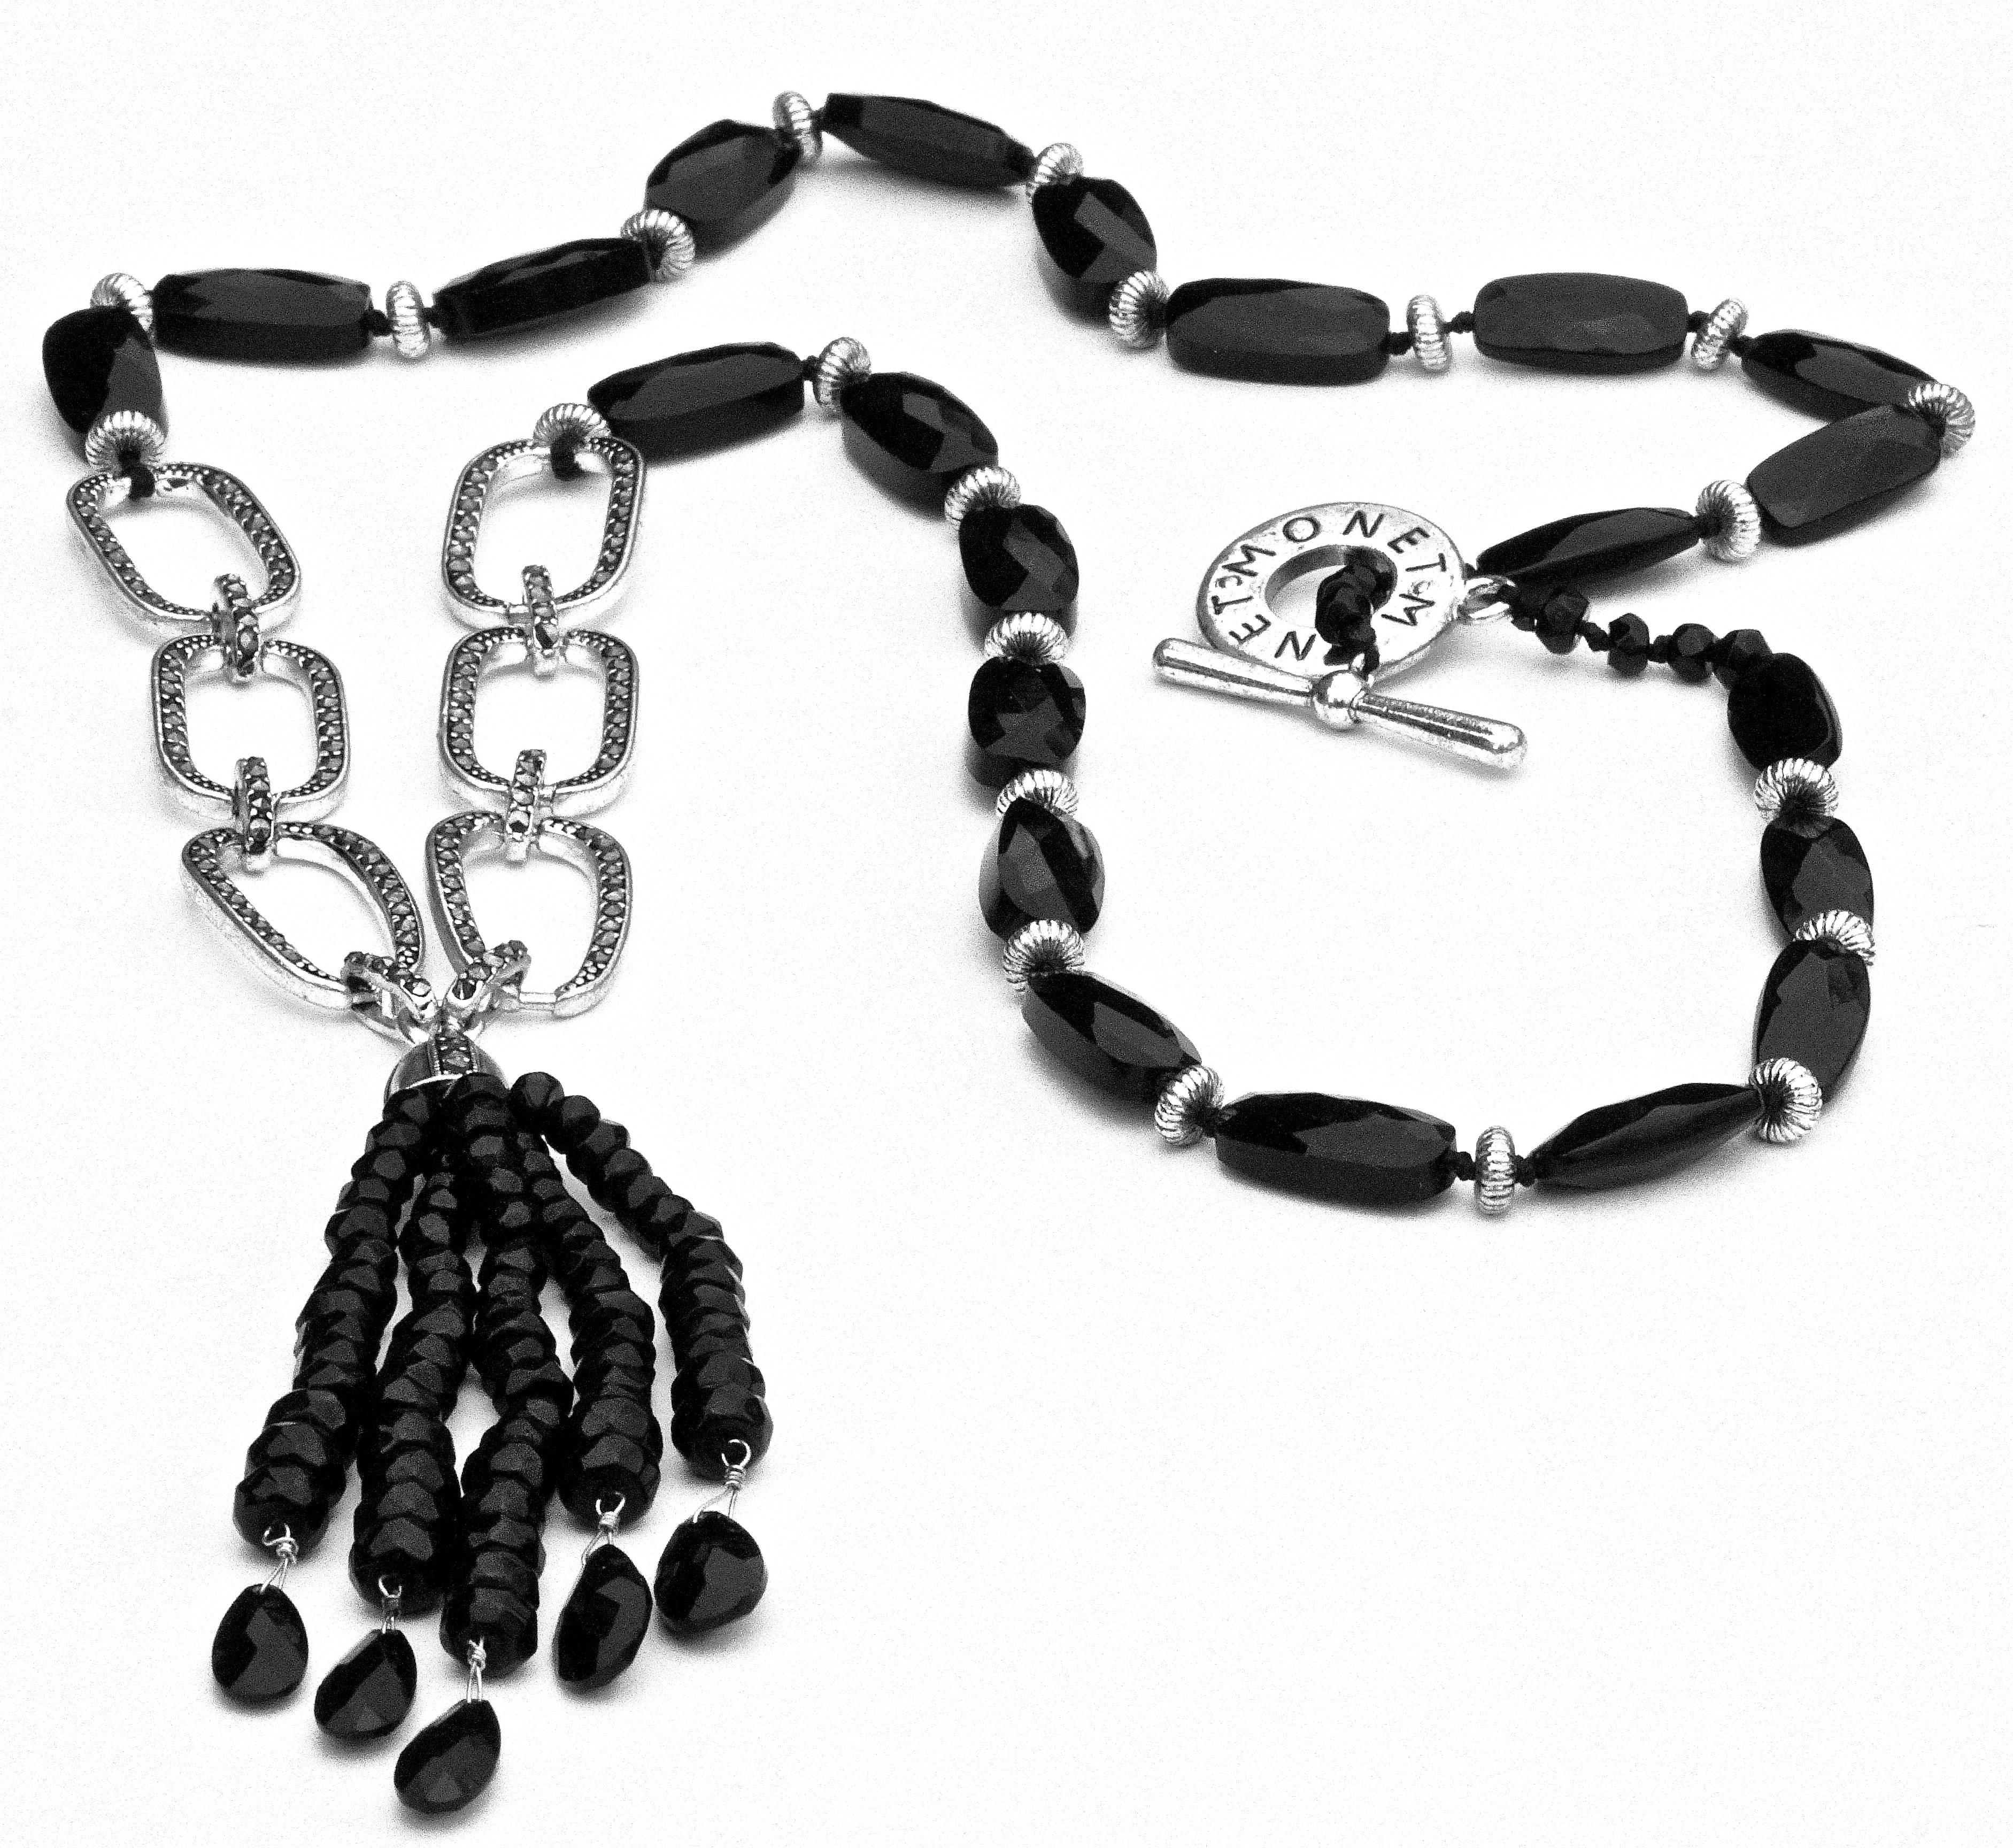 Unusual Monet silver tone faceted black glass and marcasite tassel necklace, with a toggle clasp.
The black glass beads are interspersed with silver tone ridged metal discs. Length 69.5cm, 27.36 inches, with a 9cm, 3.54 inches, five strand